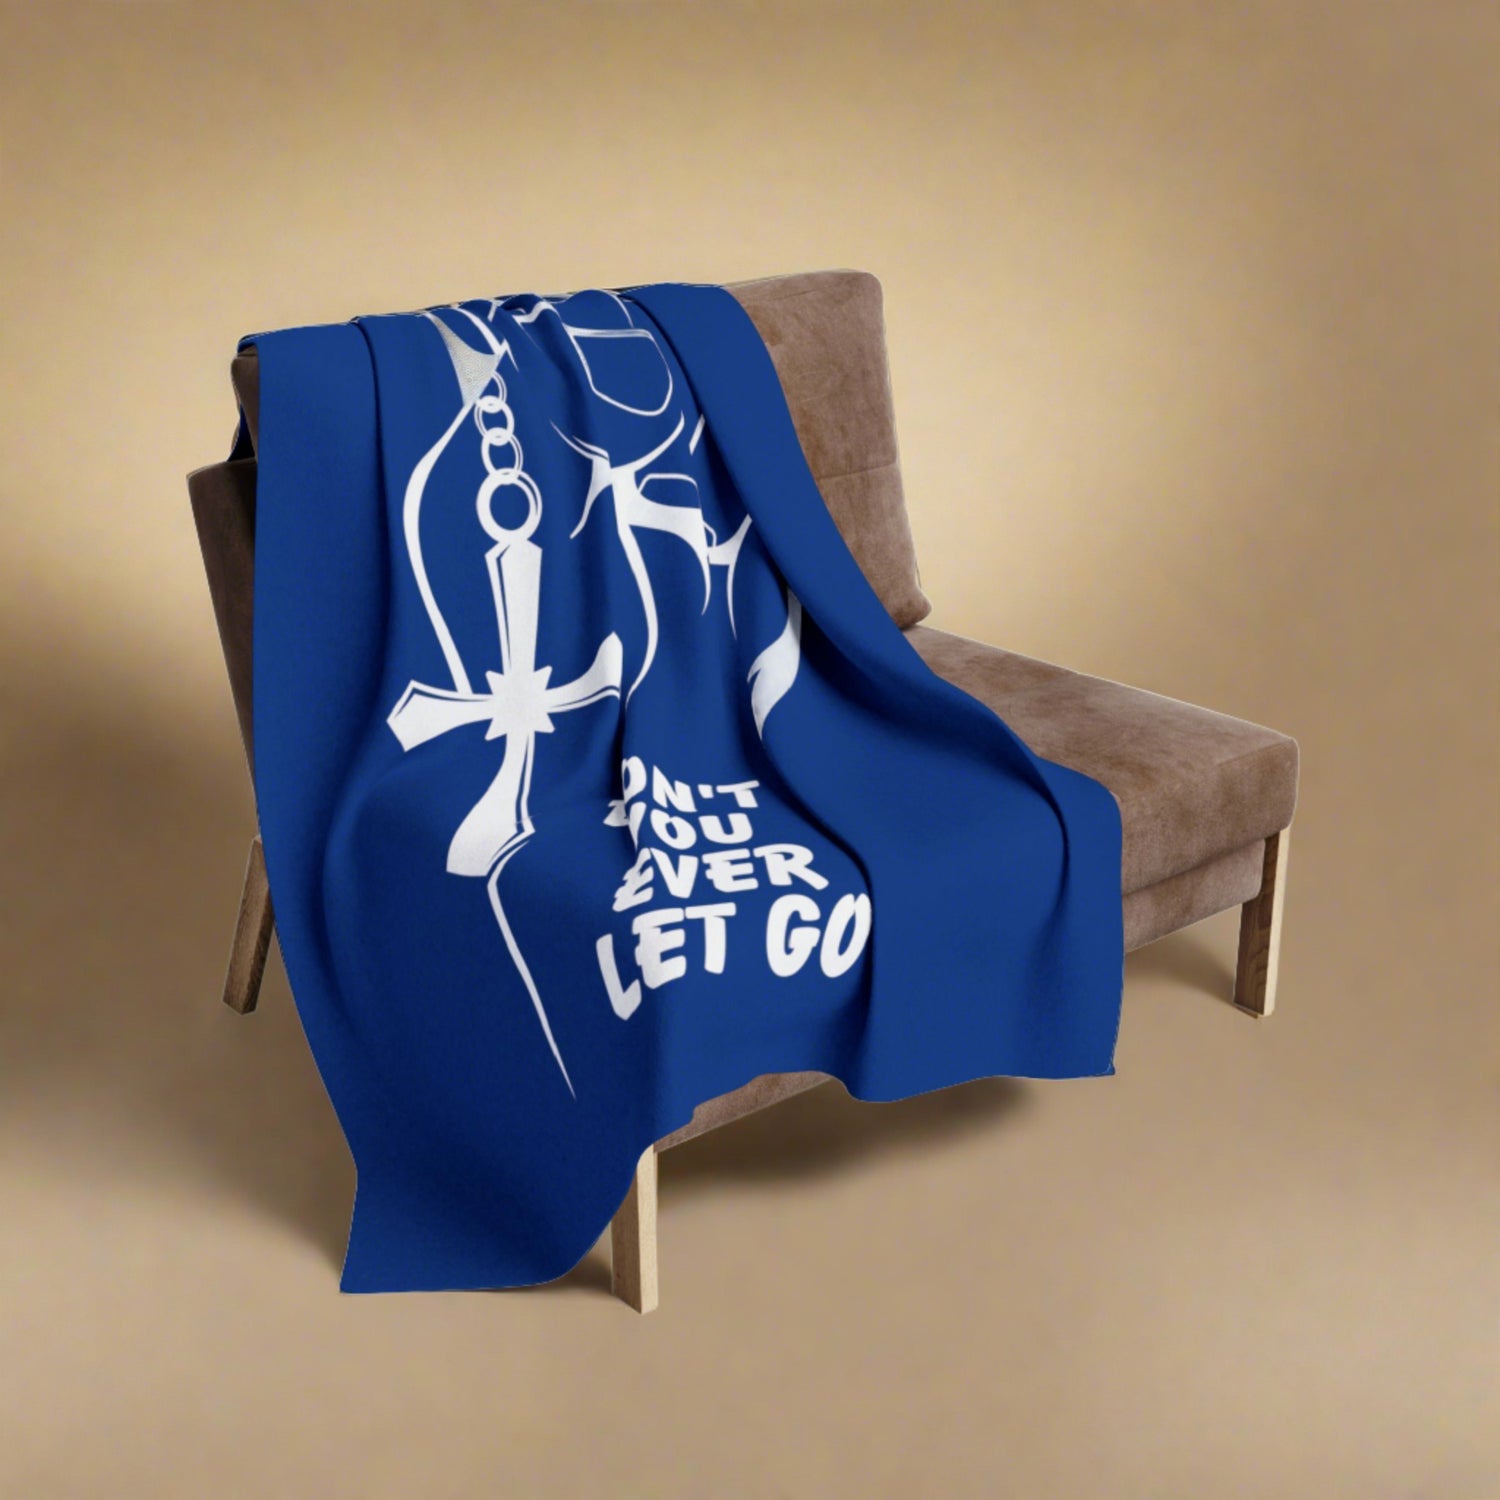 Cozy up with a movie or book to experience maximum comfort and reassurance with our blue & white hold on, don’t you ever let go emblem on an Arctic Fleece Blanket.  Our emblem serves as a reminder to never let go and trust that everything will be alright.